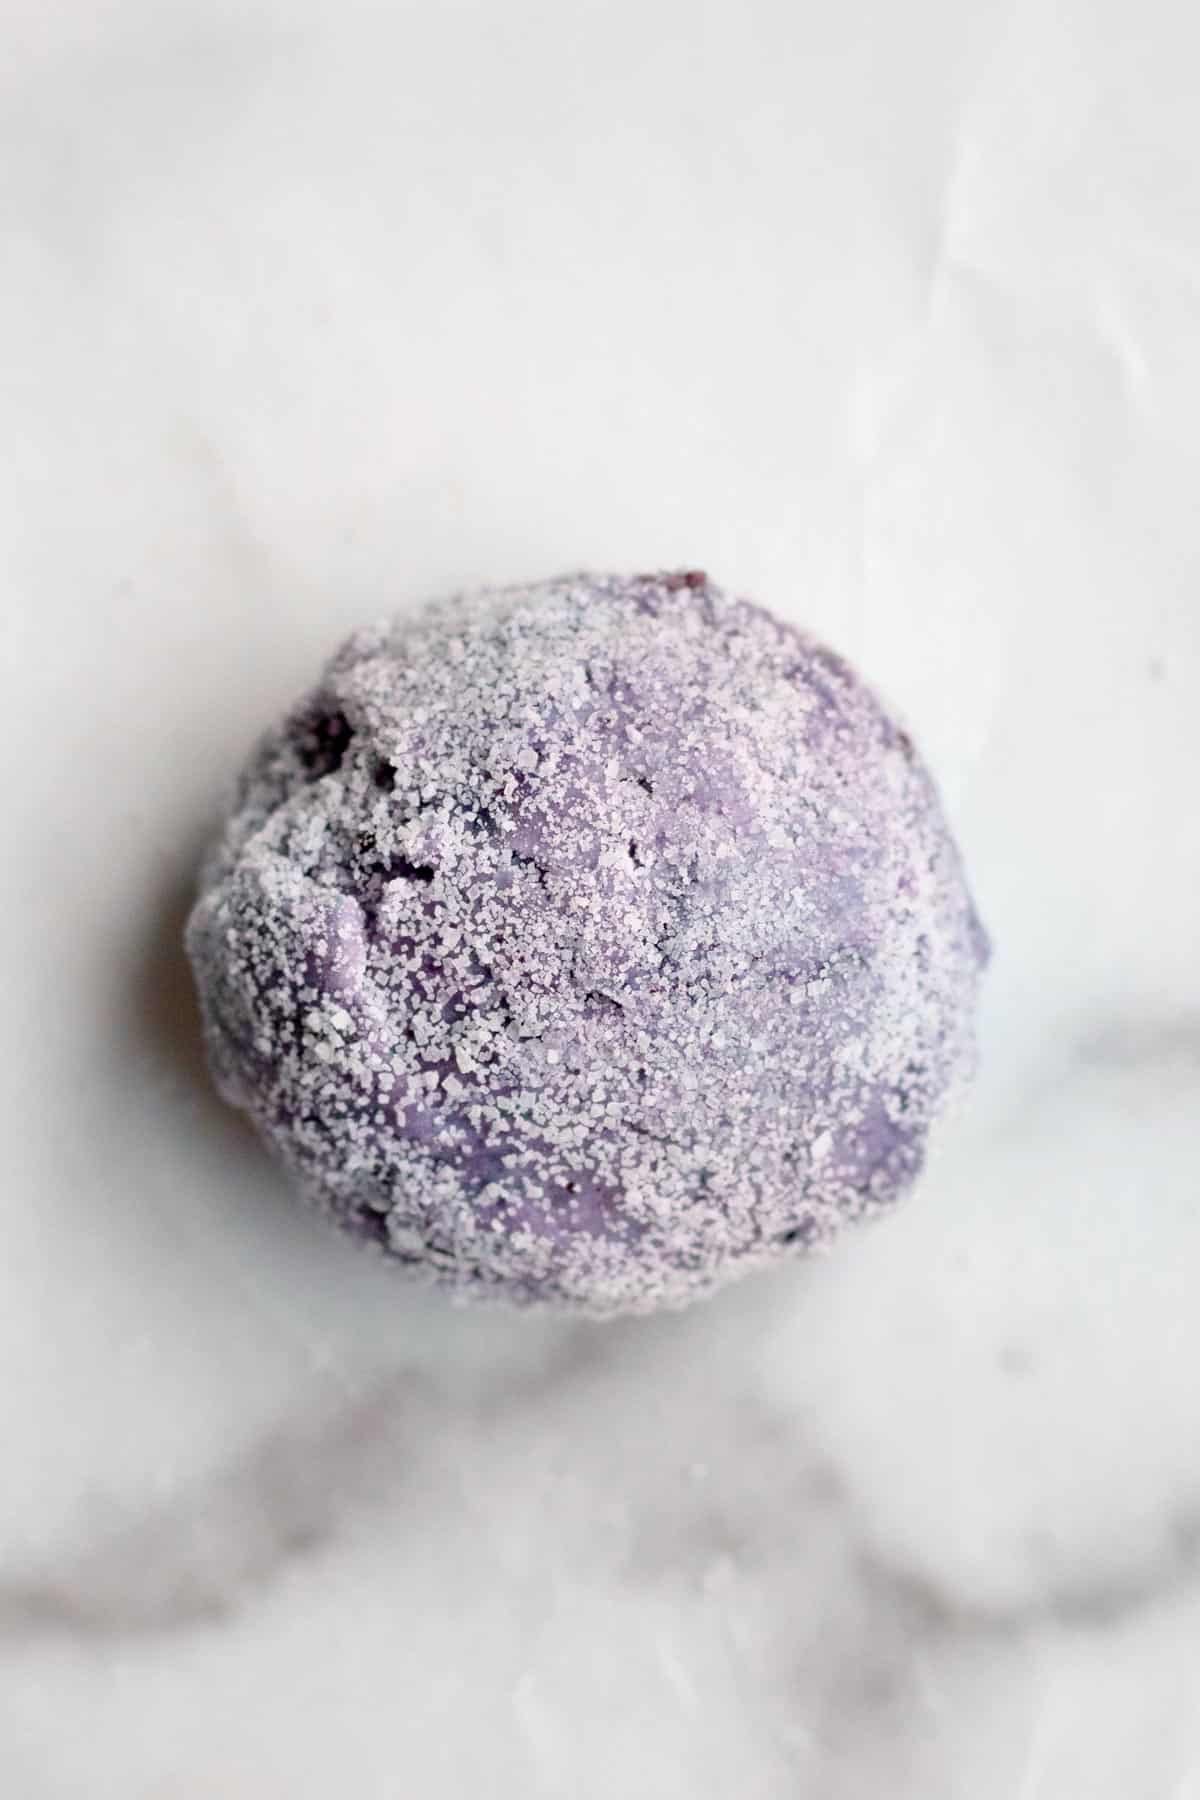 A cookie dough ball rolled in granulated sugar.